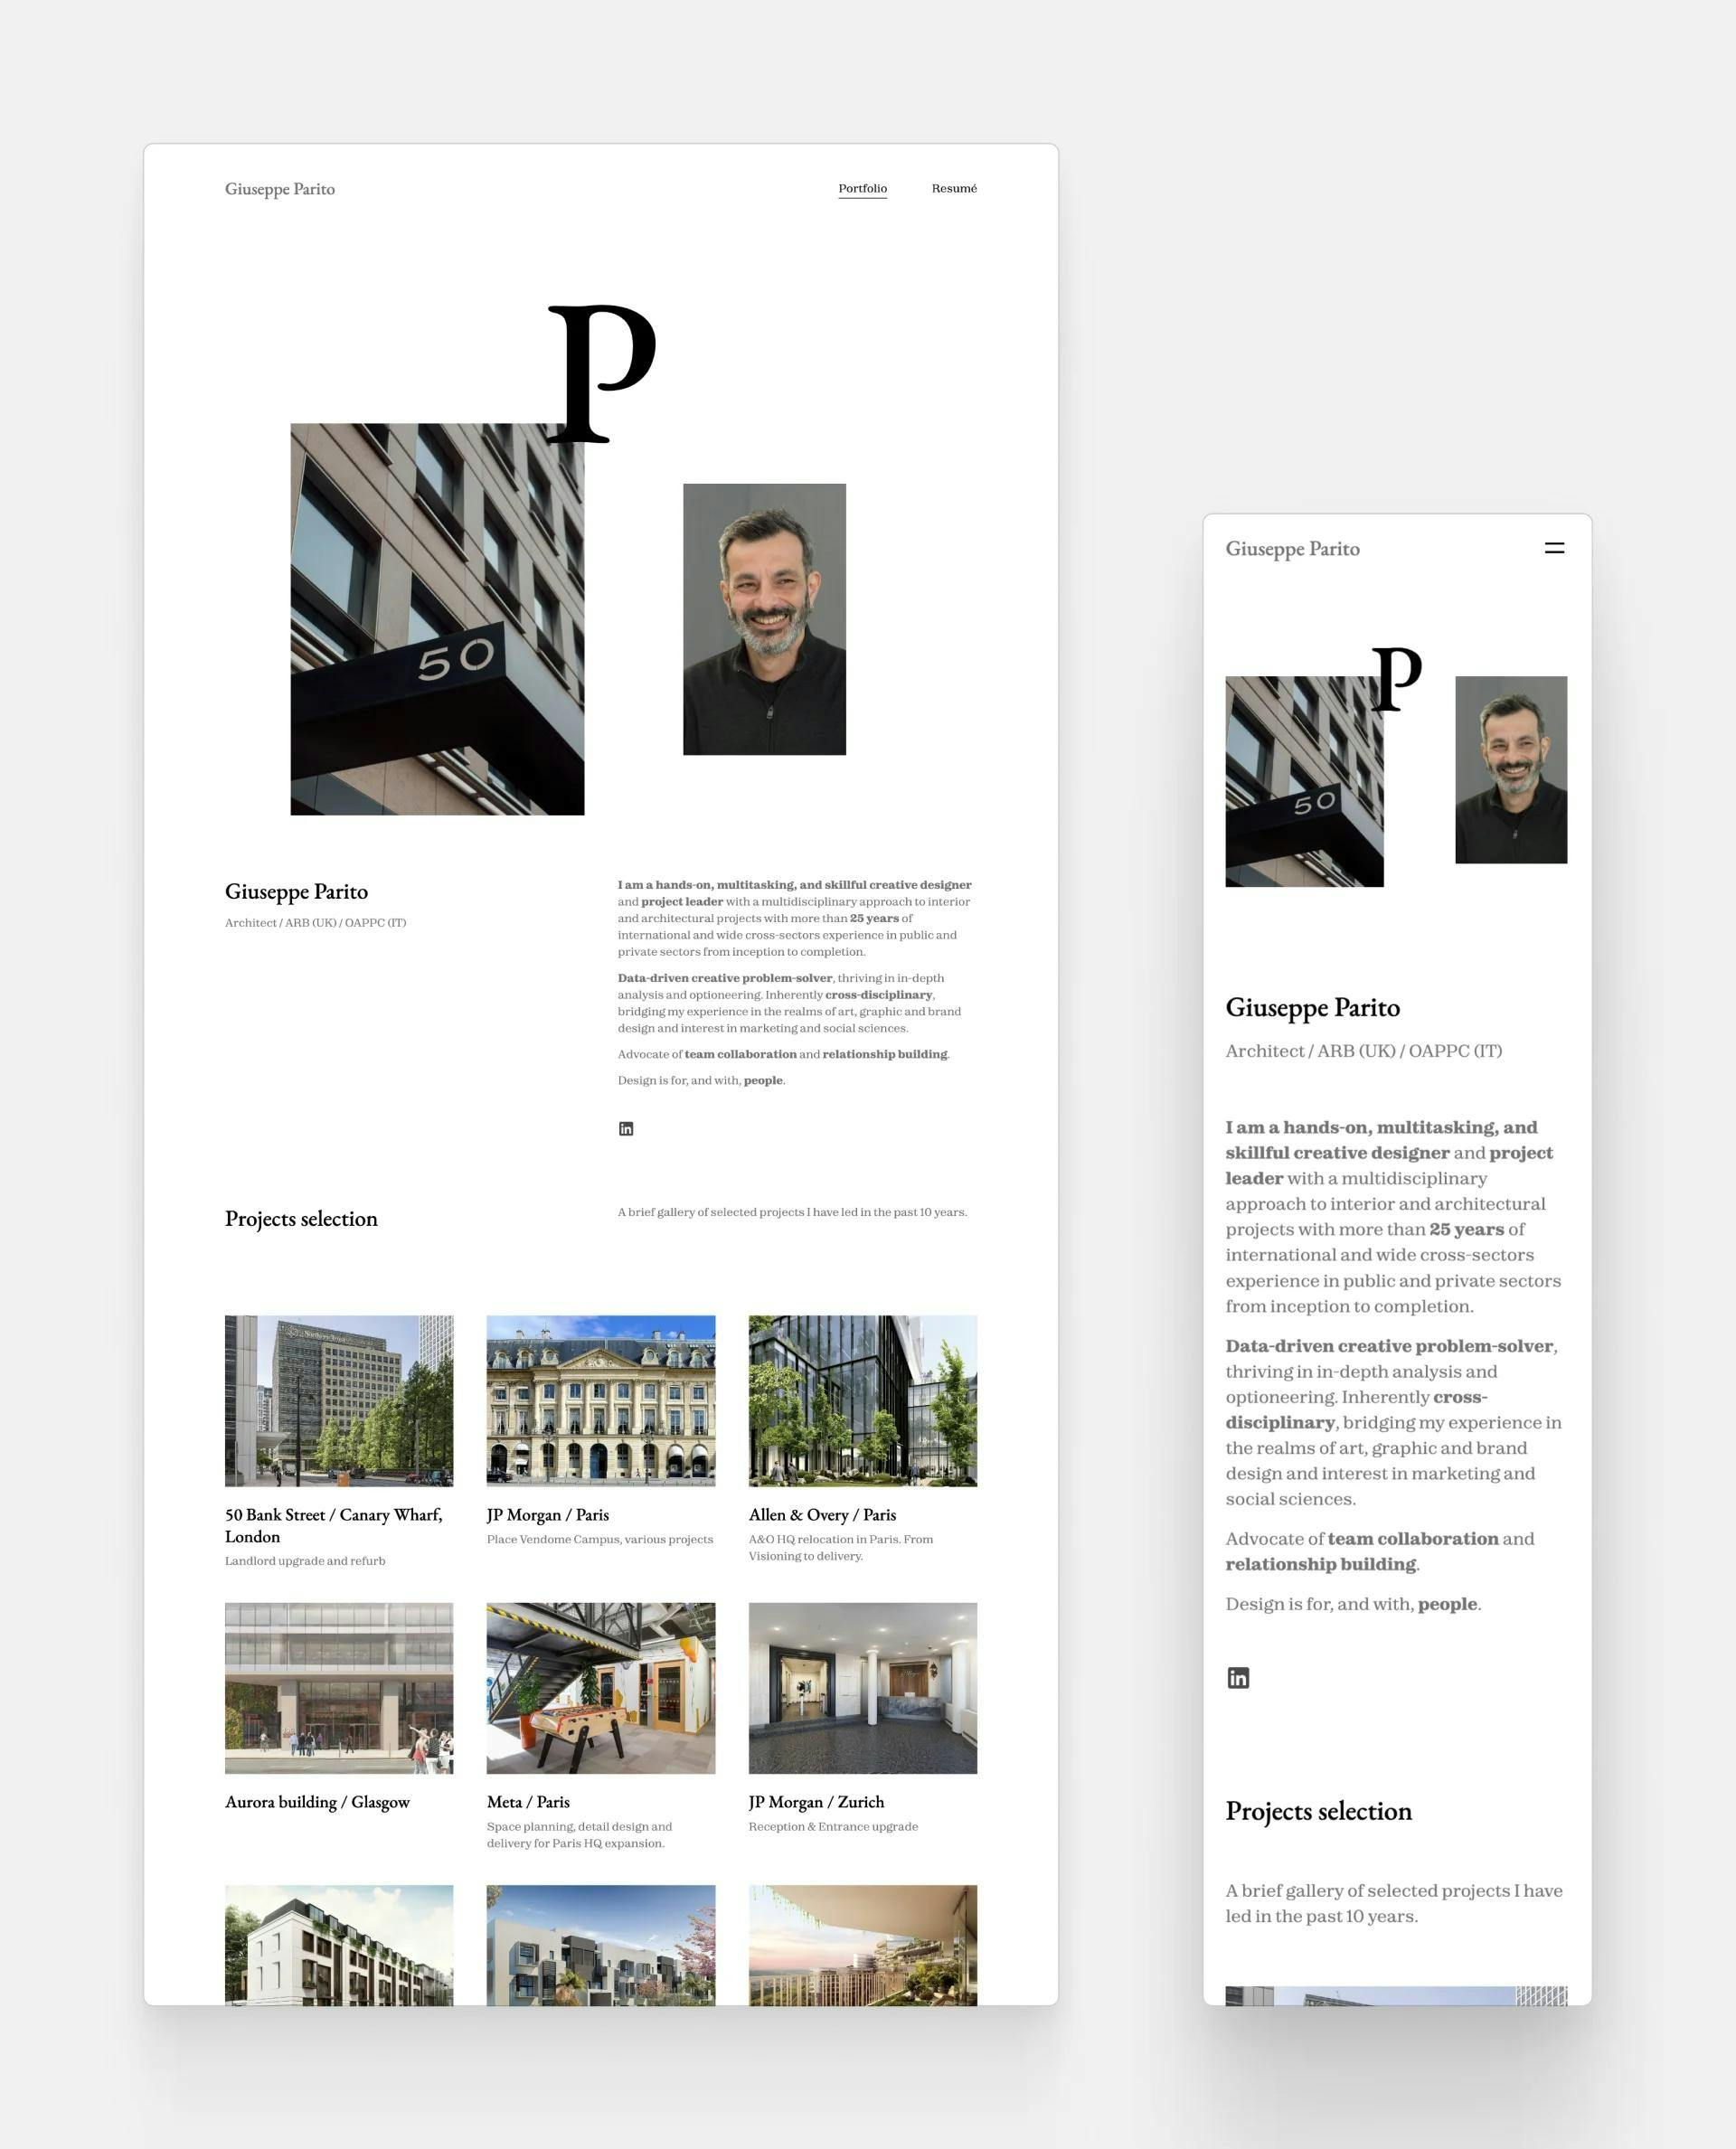 Screenshot of Giuseppe Parito's Architecture website - desktop and mobile view next to each other